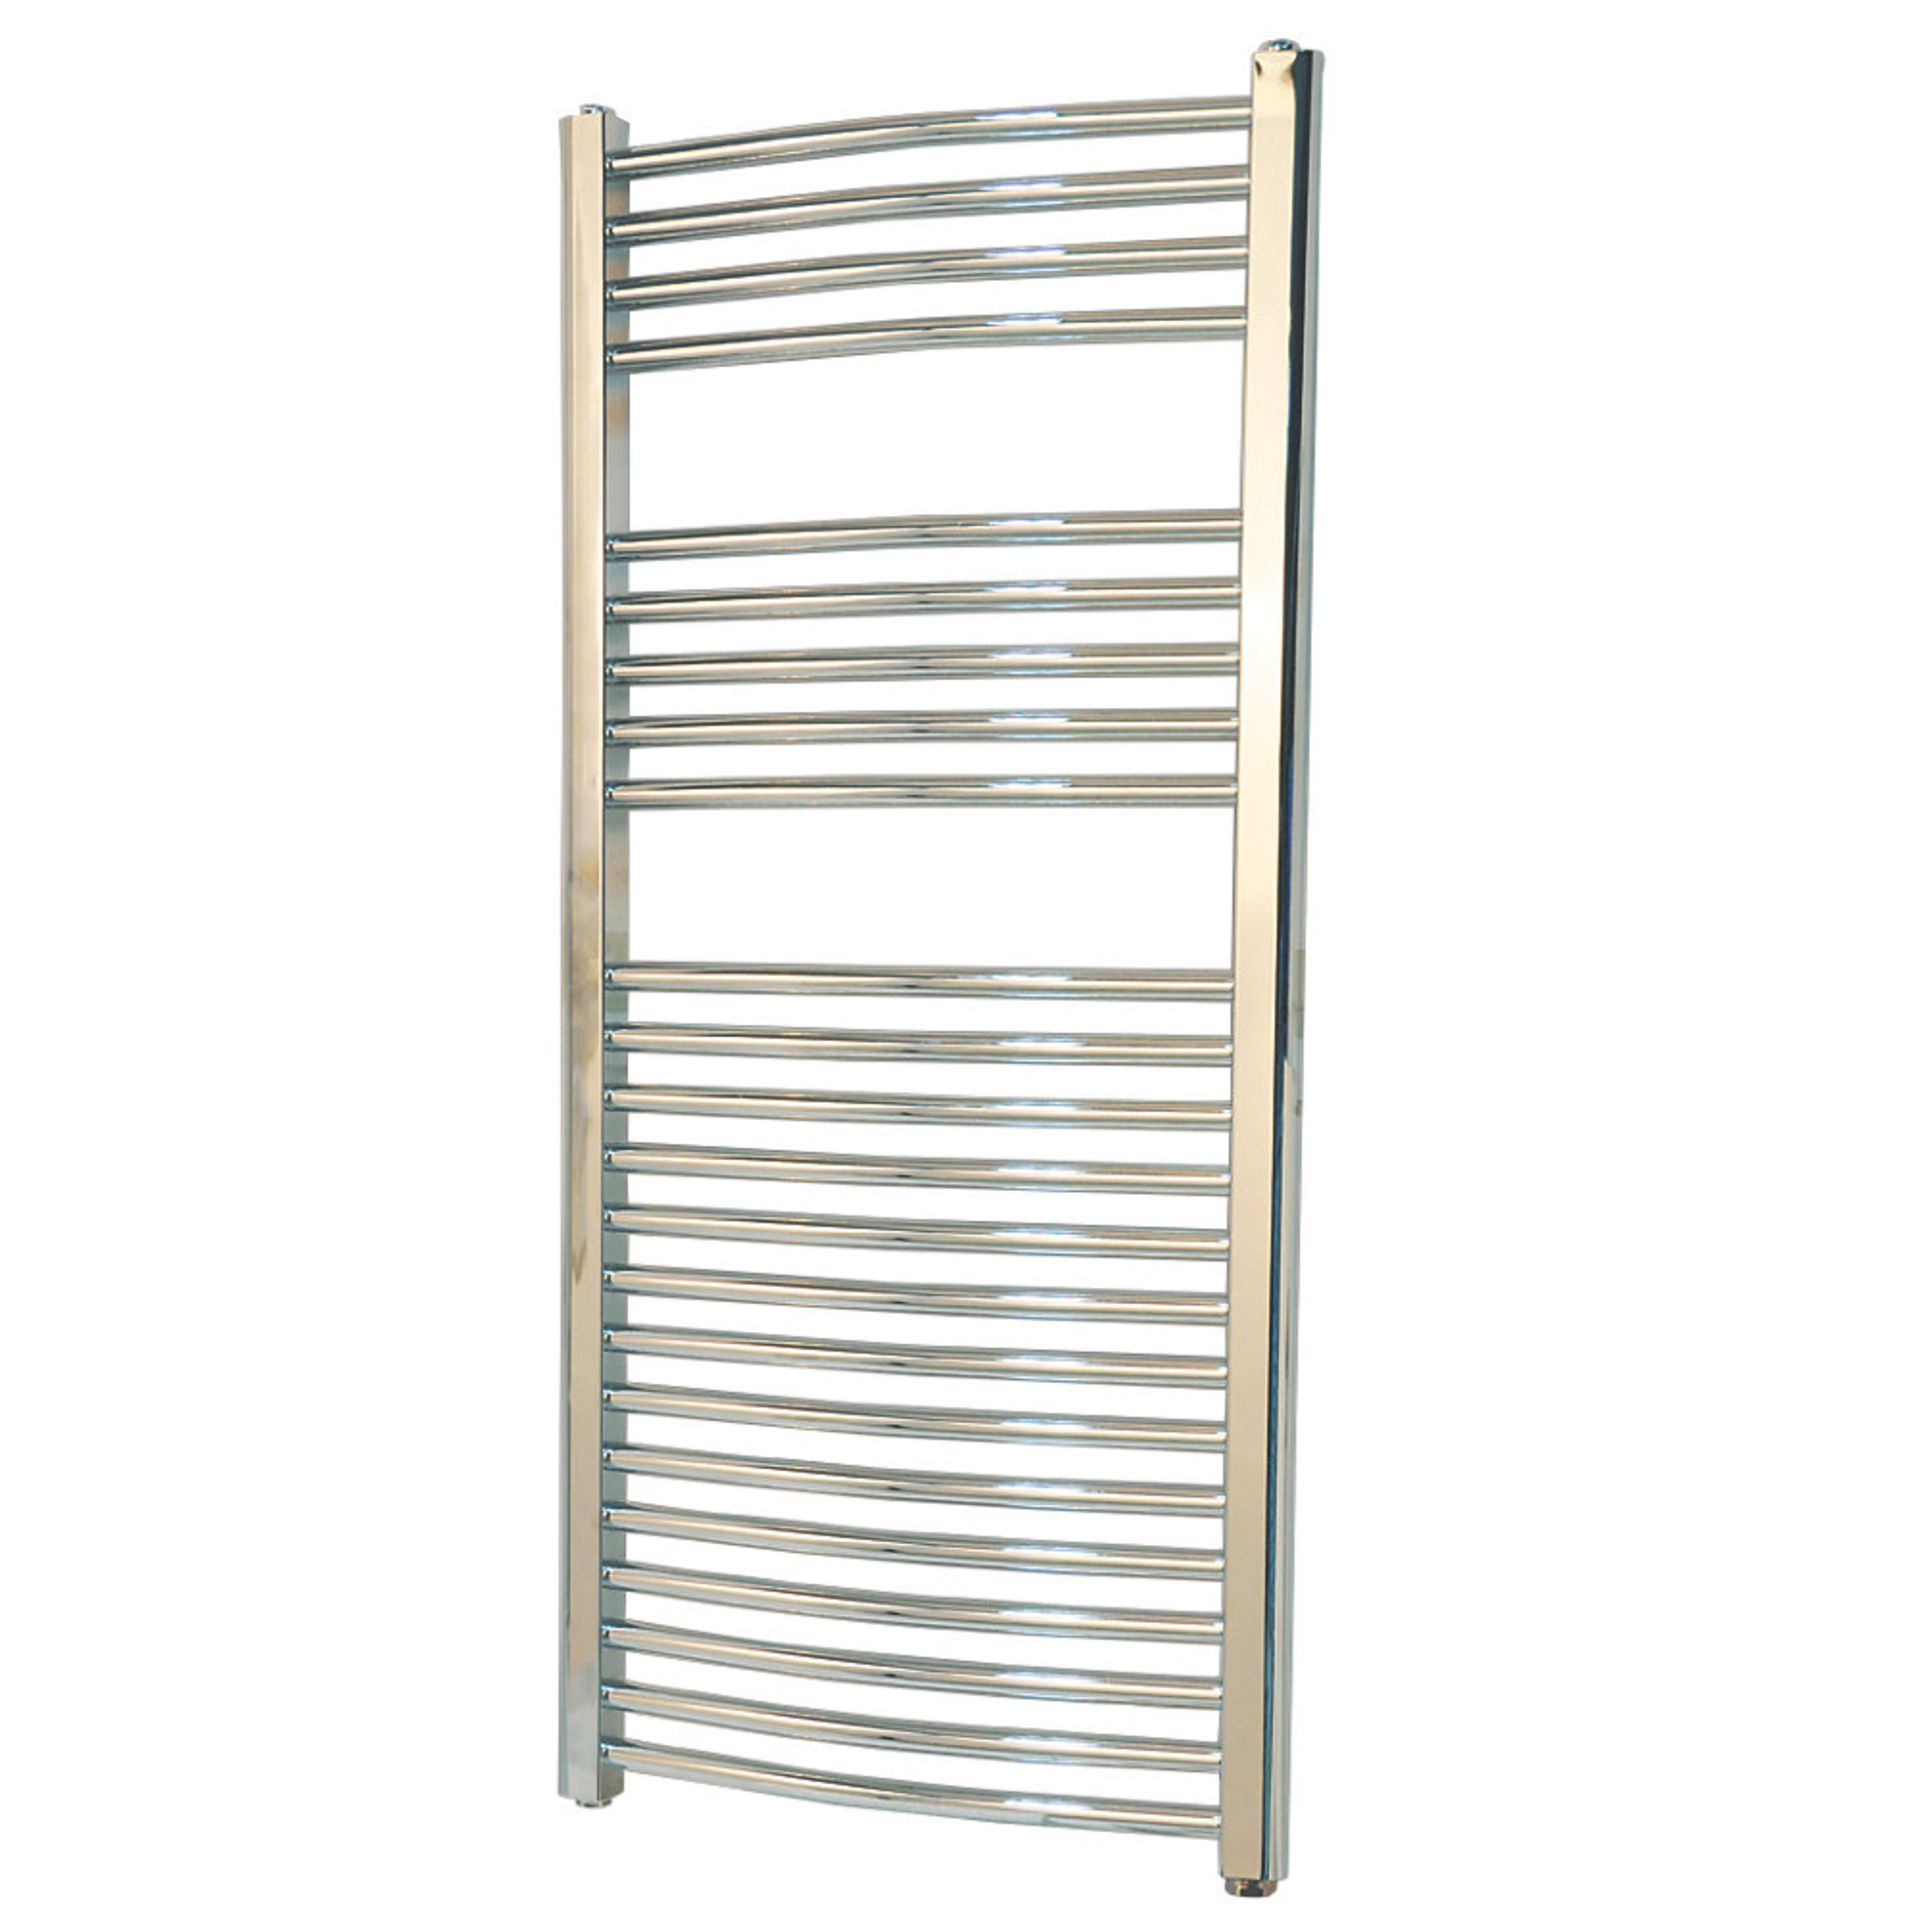 (H8) 1100x500mm Flomasta CURVED ELECTRIC TOWEL RADIATOR. Electrical installation only. Element ... - Image 3 of 5